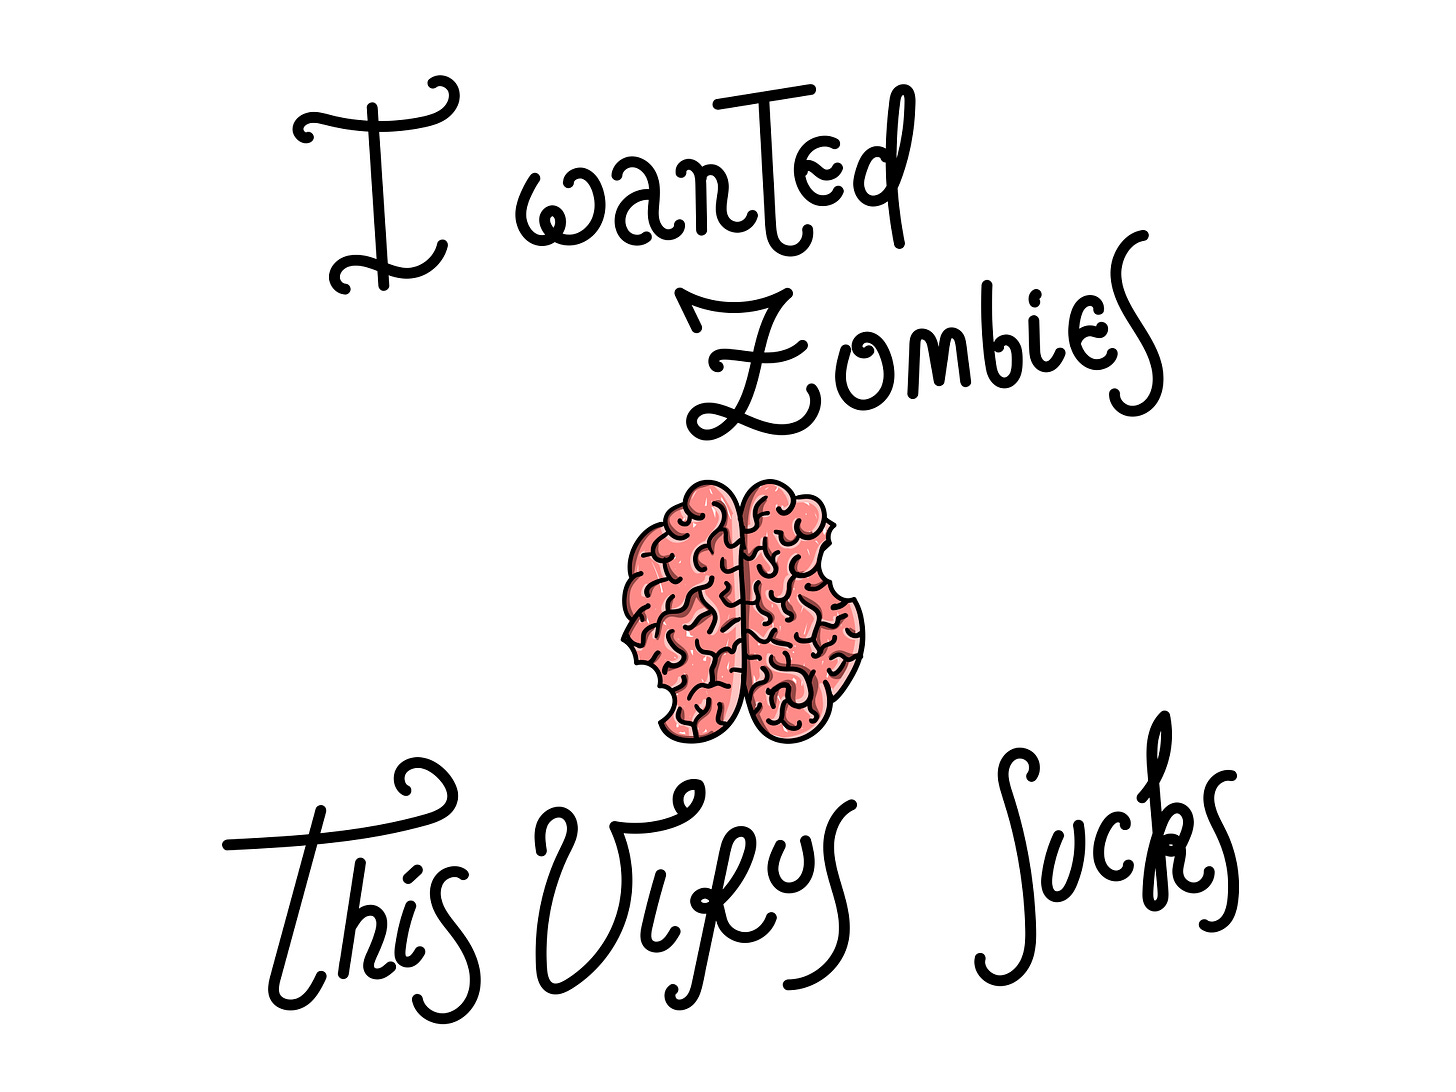 "I wanted Zombies, This virus sucks". Cartoon Postacrd. Brains Doodle simple cute design. White background poster with typographic lettering.